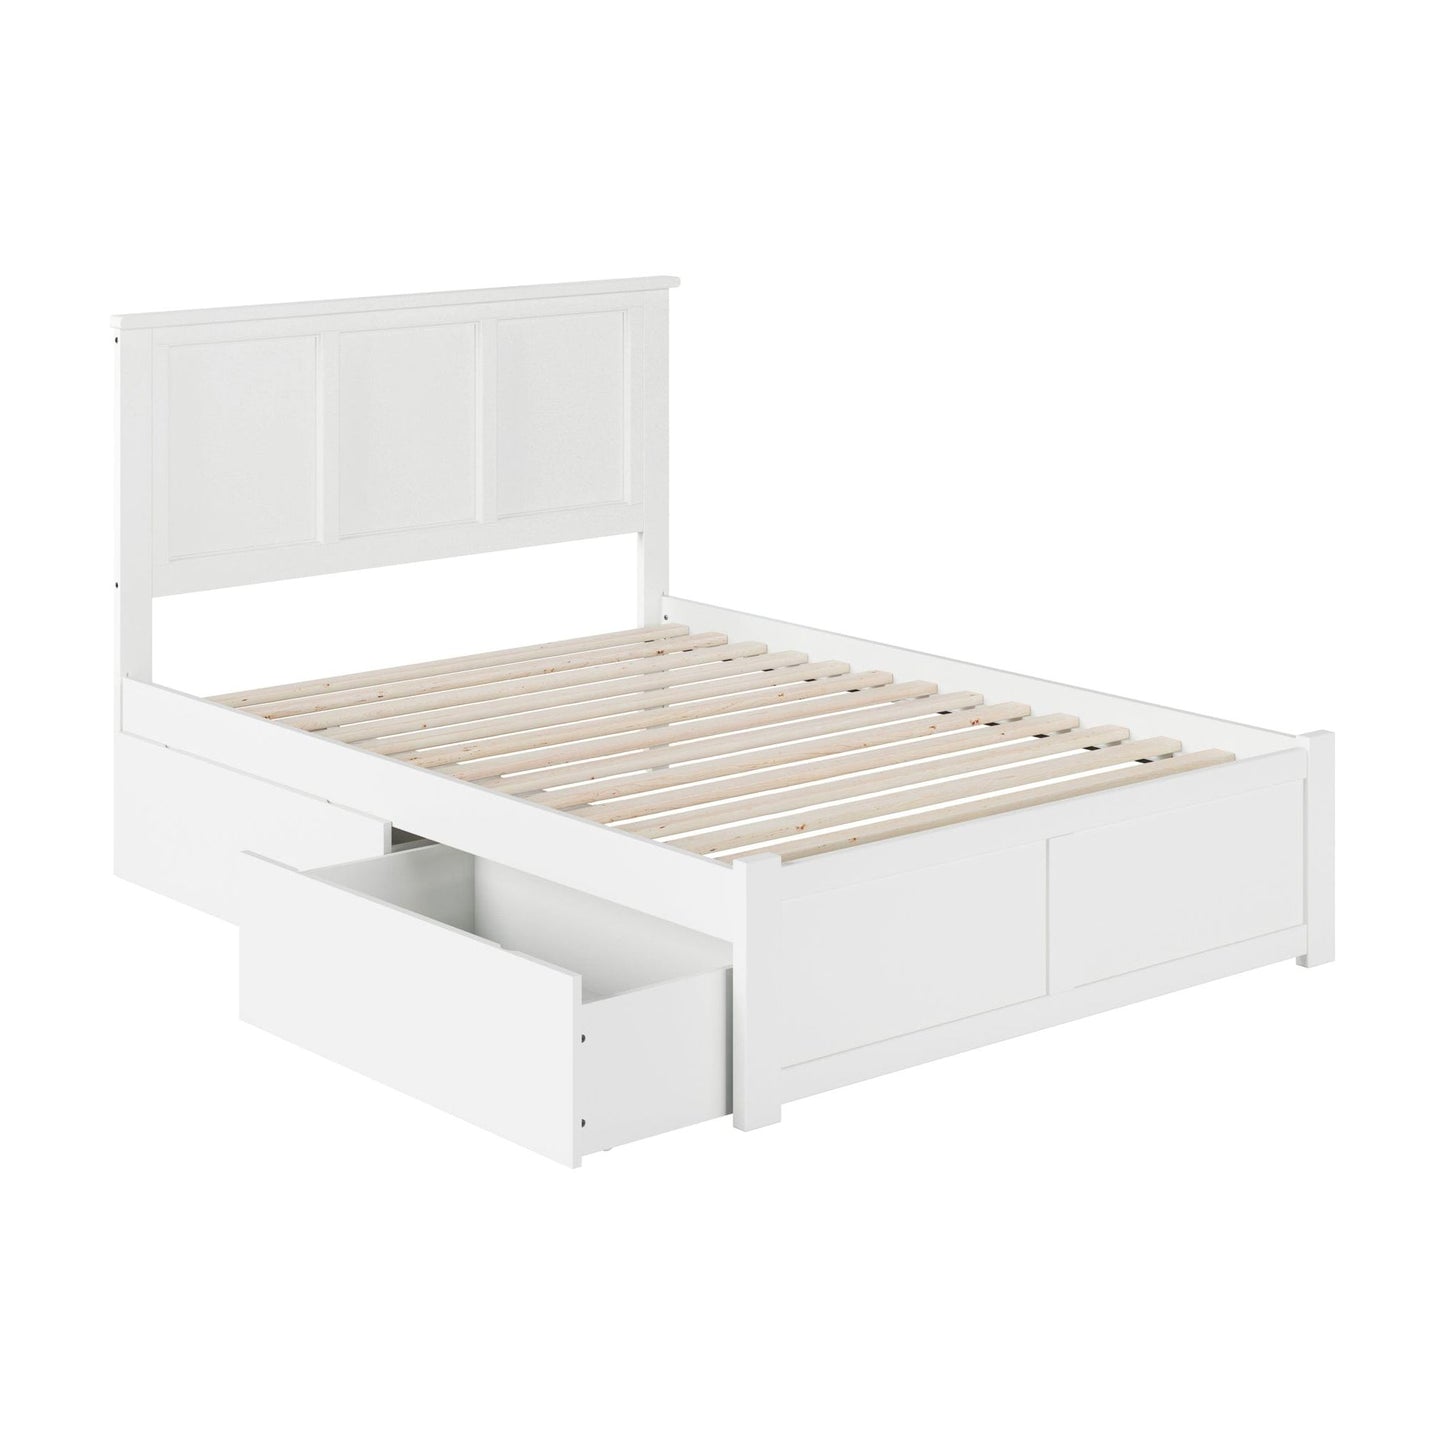 AFI Furnishings Madison Full Platform Bed with Flat Panel Foot Board and 2 Urban Bed Drawers